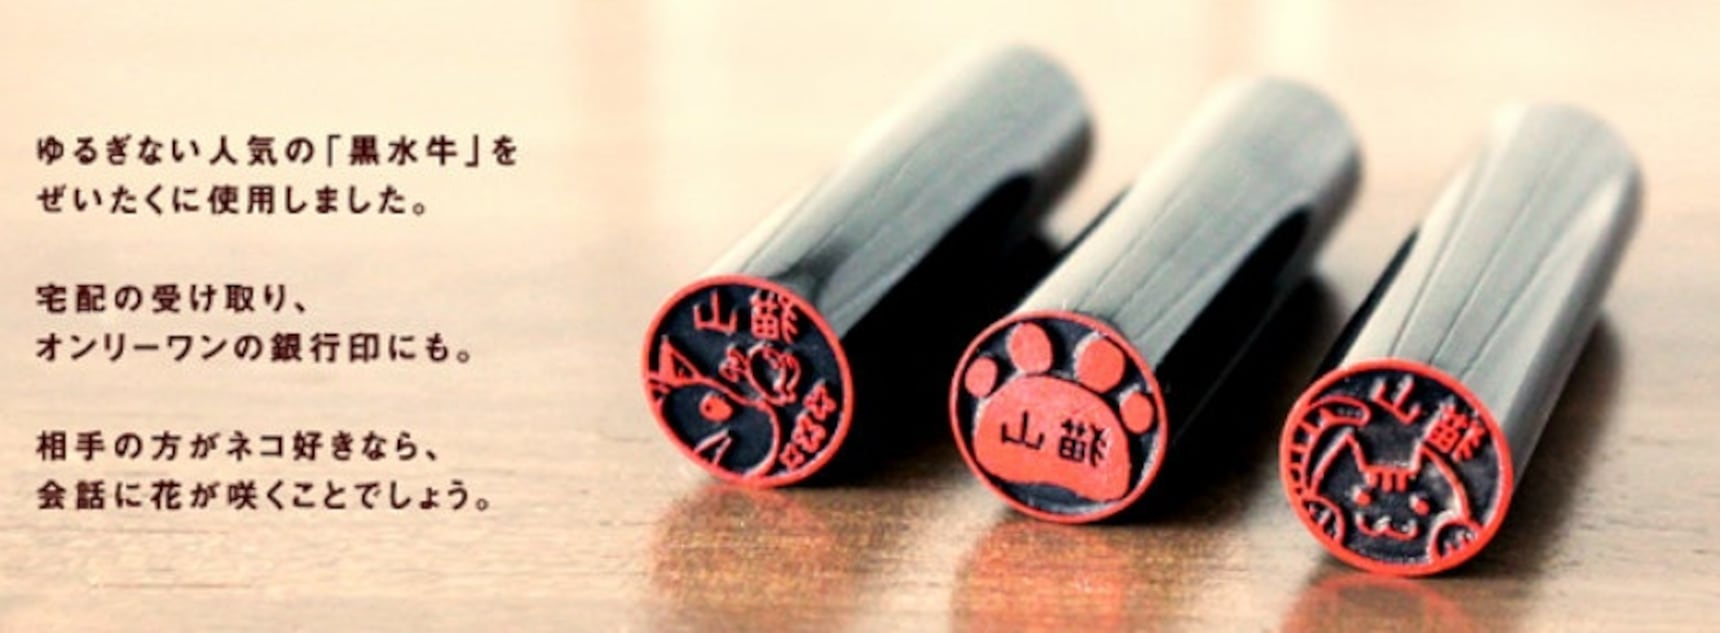 Personalize Your Stamp with Cats!